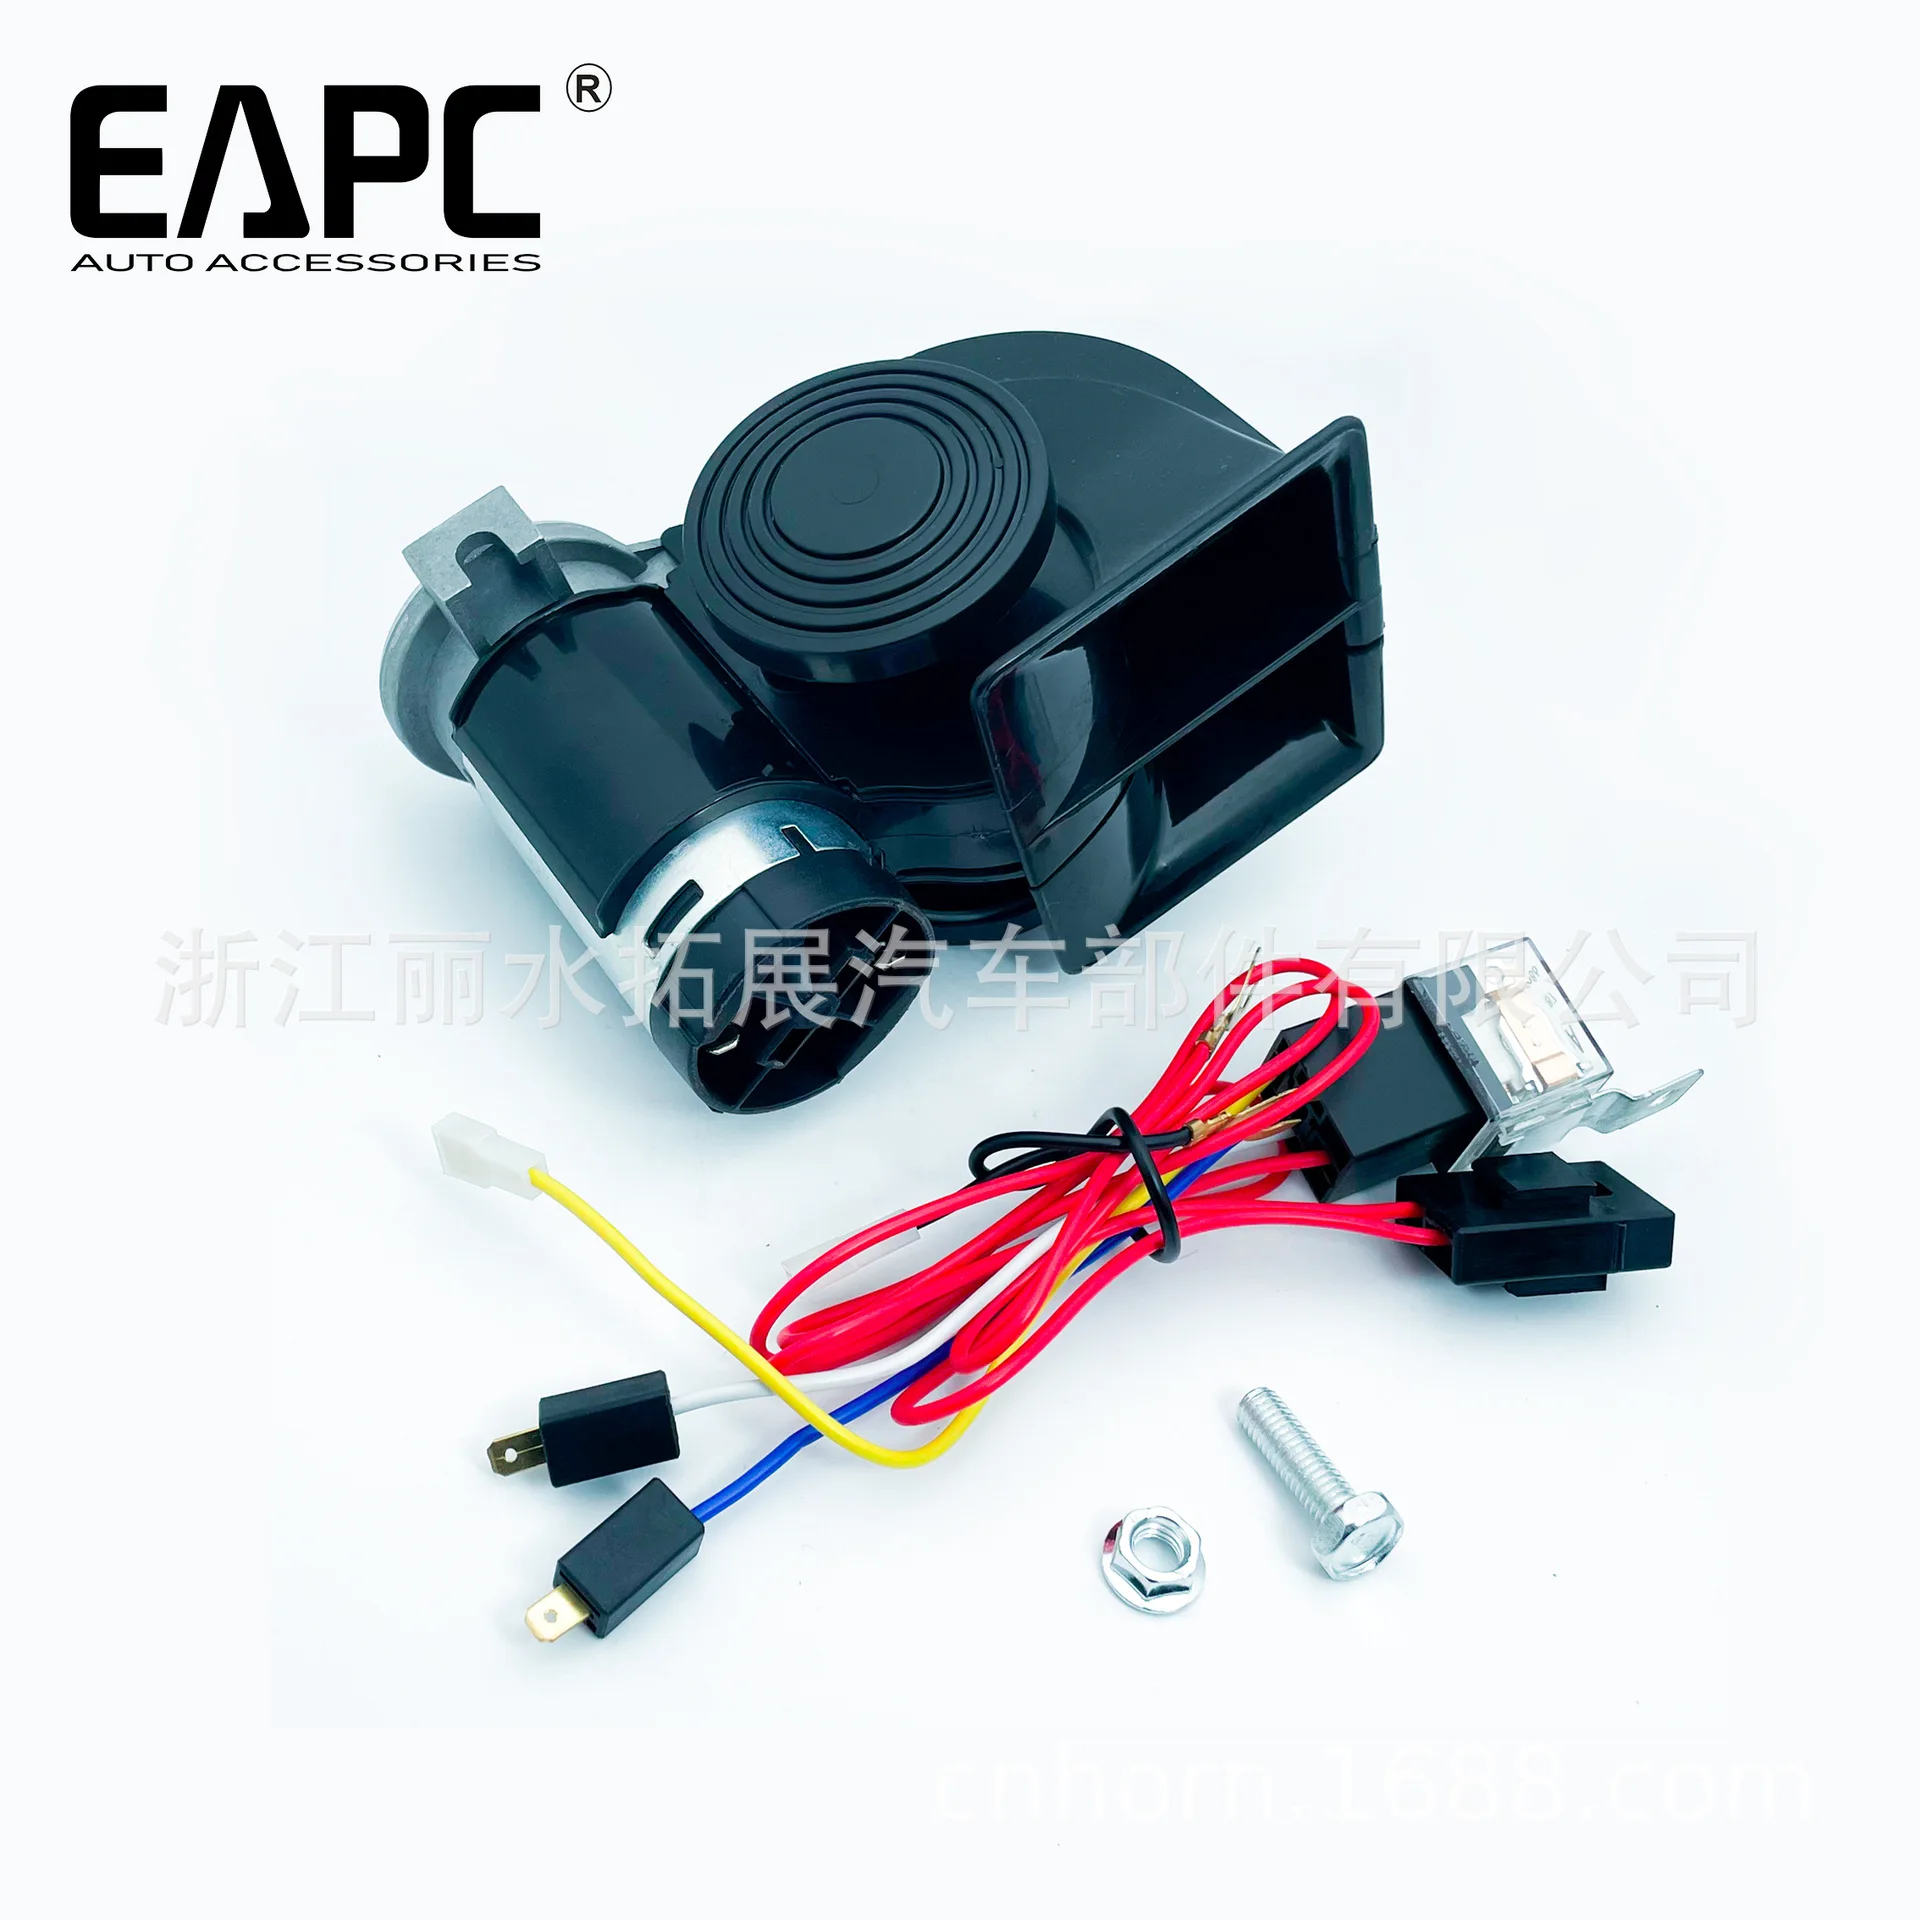 2-Way Auto Air Horn with Motor Compressor - China Siren and Speakers,  Motorcycle Horn Speaker